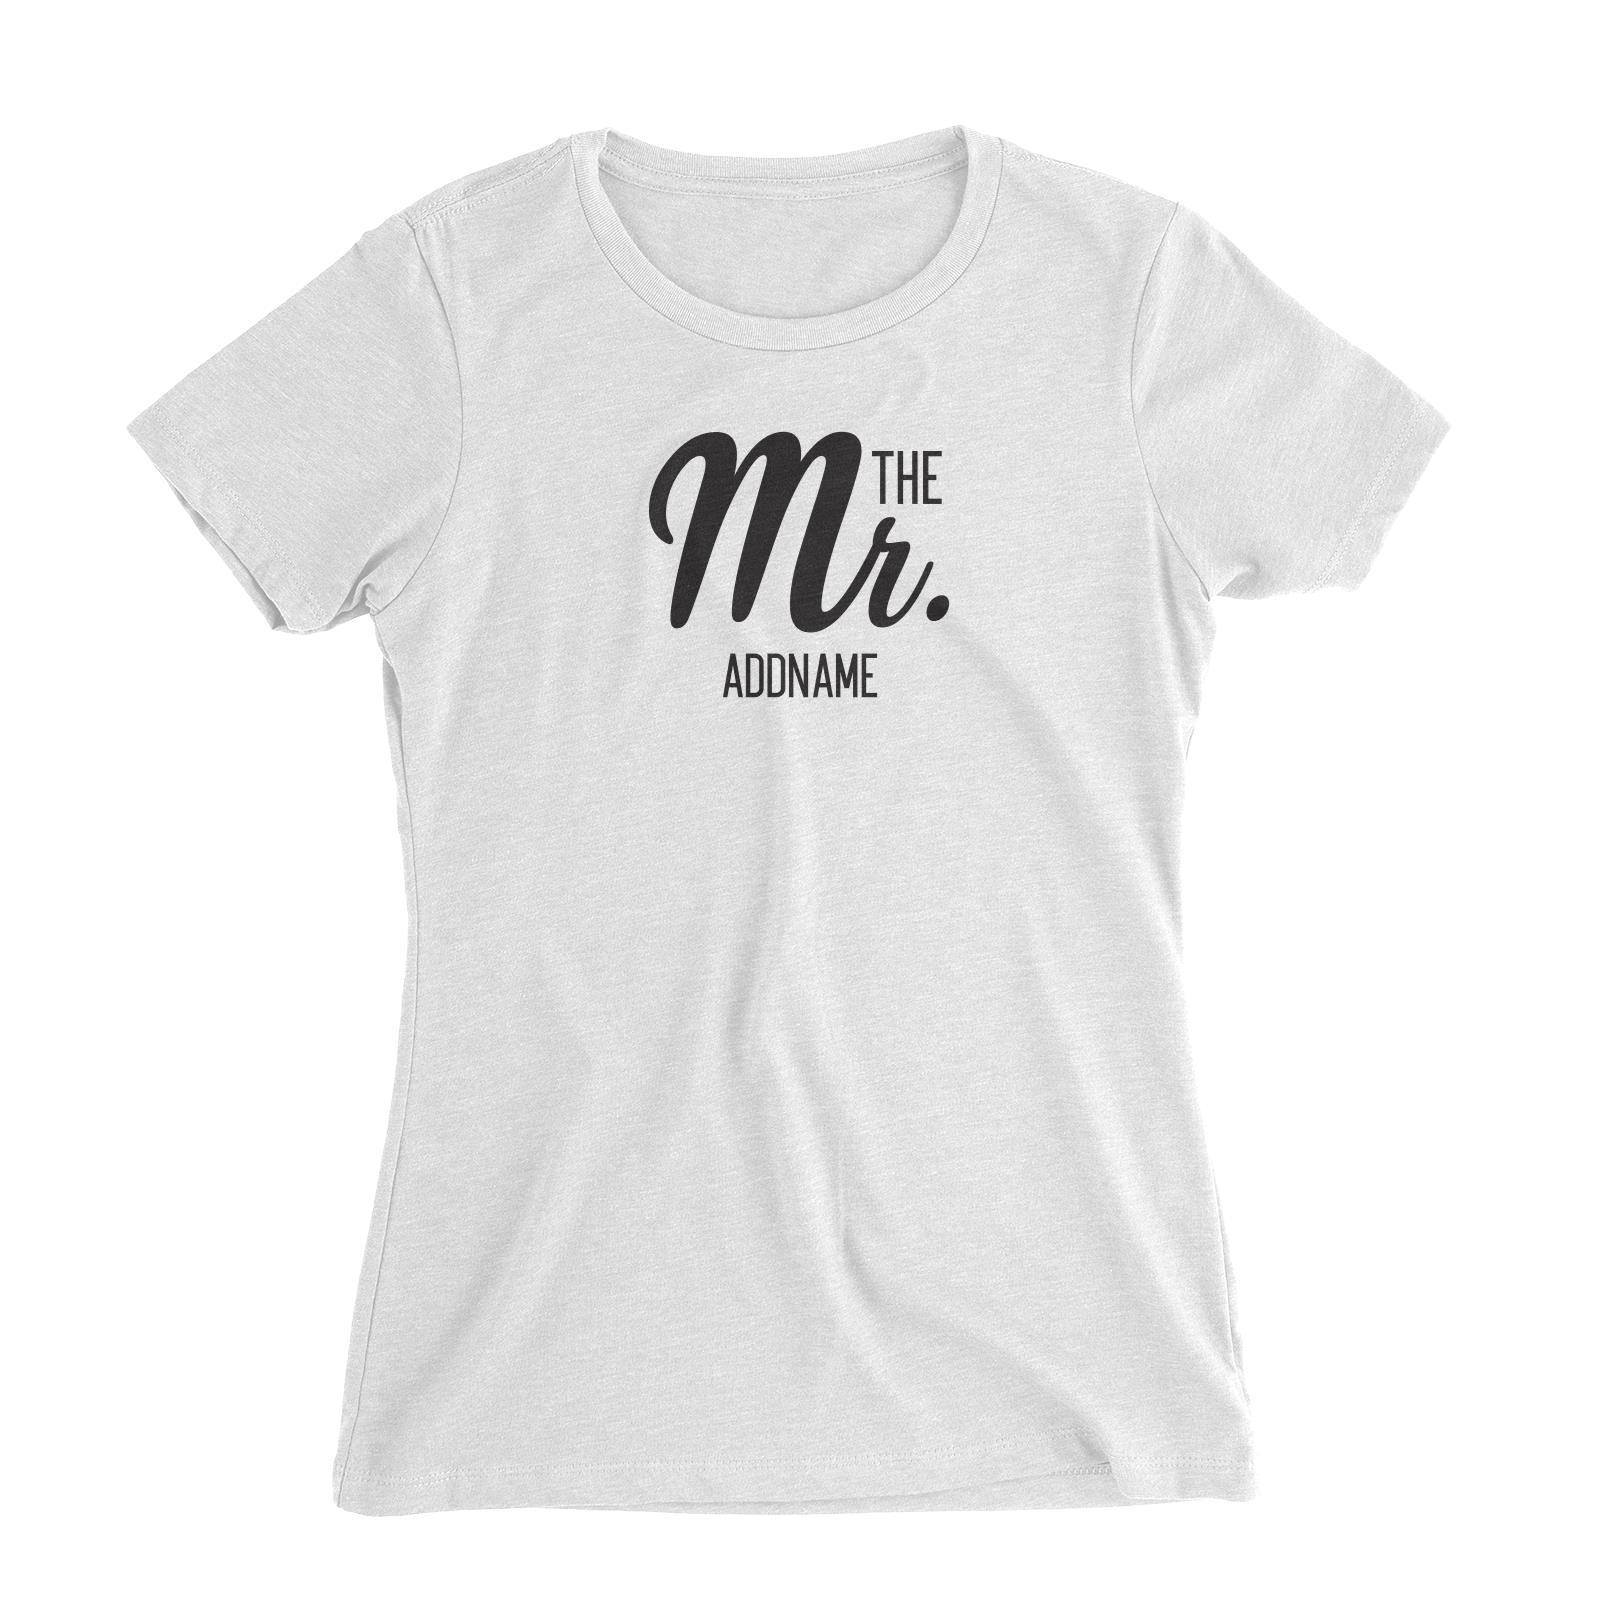 Husband and Wife The Mr. Addname Women Slim Fit T-Shirt